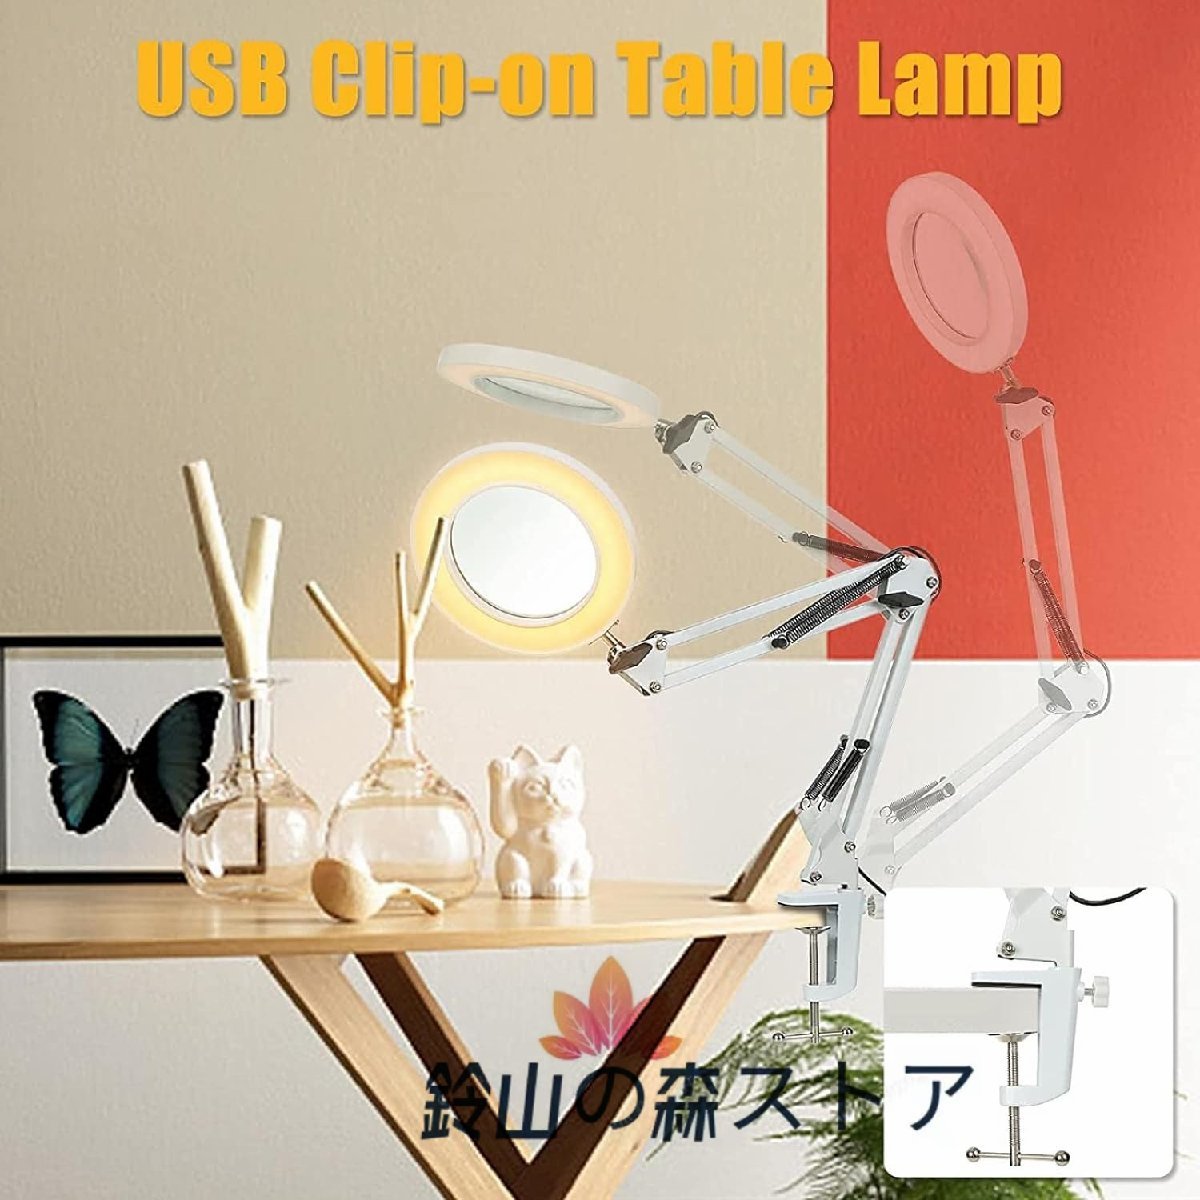  new arrival * magnifying glass tes clamp 10 times lens 64 LED light clamp attaching repair industrial arts reading Crows Work 3.. style light mode USB power supply handle zfli